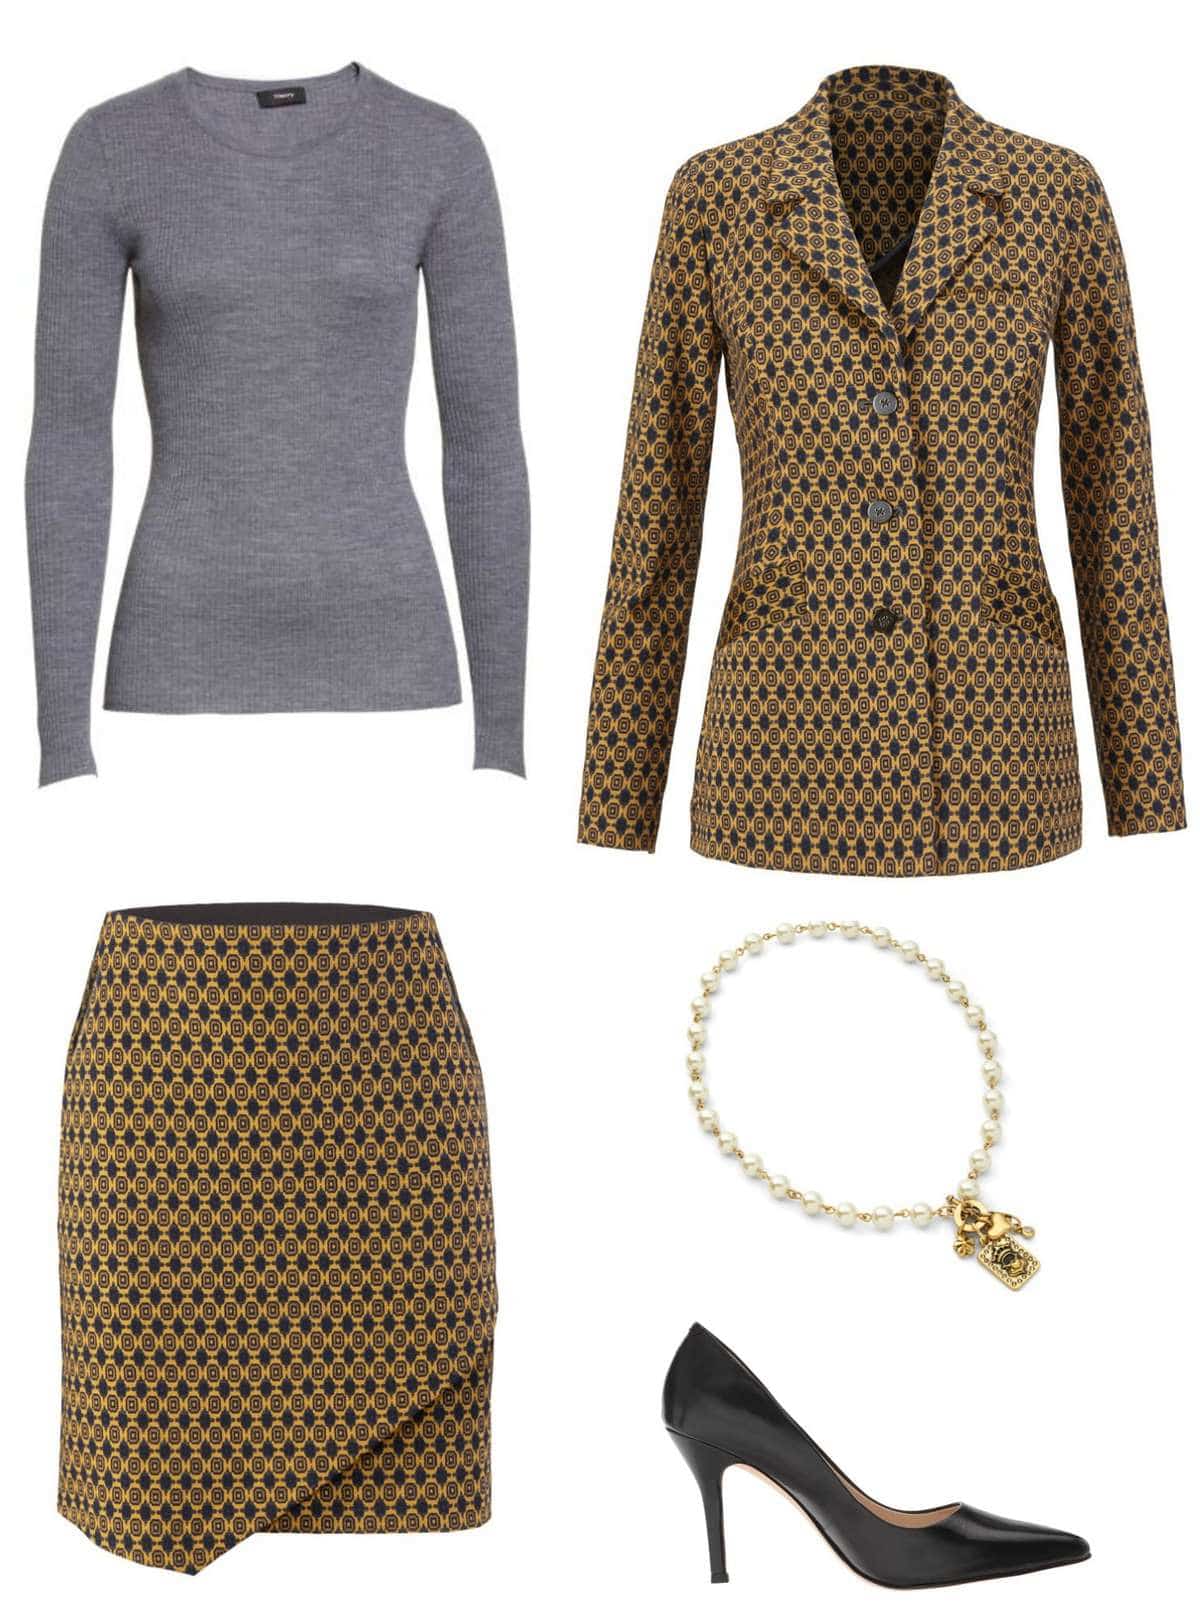 The cabi Standout Skirt and Standout Jacket are busy; tone them down with a classic grey healther merino crewneck, the cabi Heritage Necklace, and classic black leather ponted toe pumps.